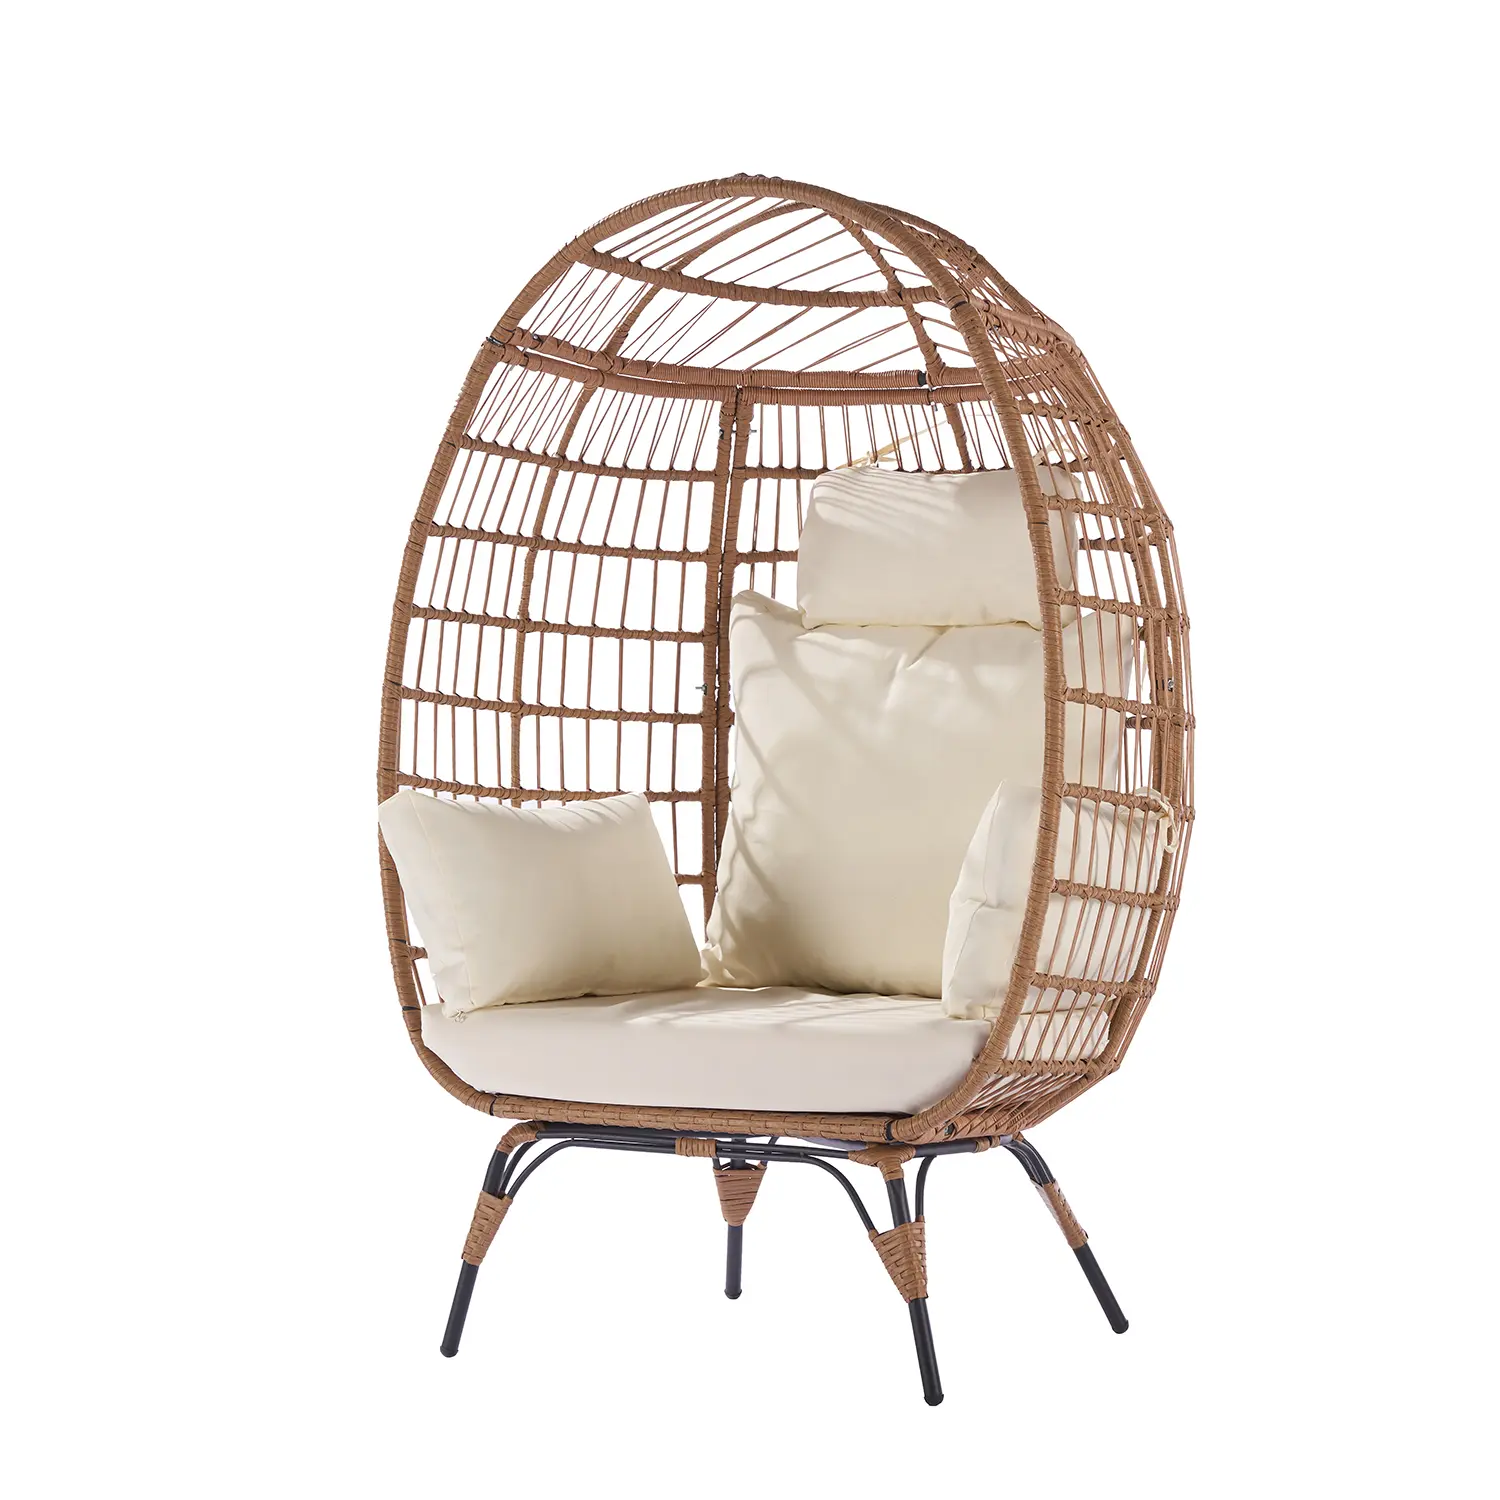 Wicker Outdoor Lounge Chair Egg Chair with Cushions